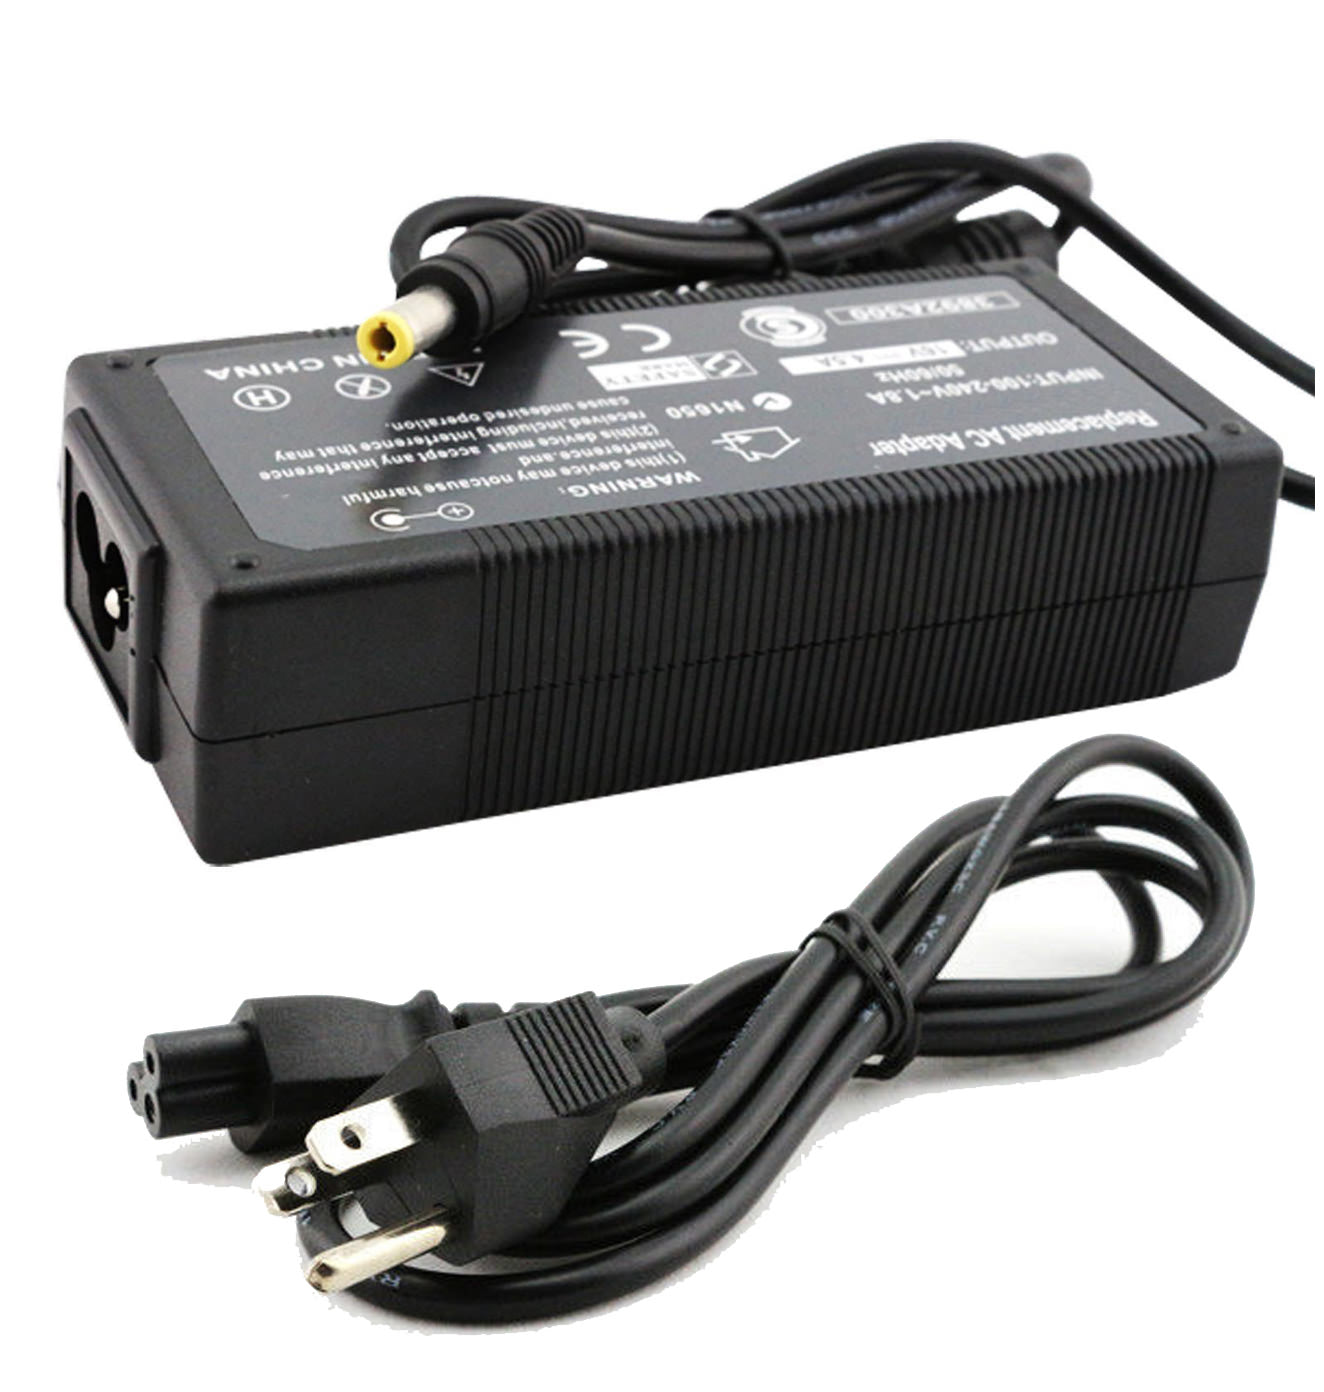 AC Adapter Charger for IBM ThinkPad T43 Notebook.